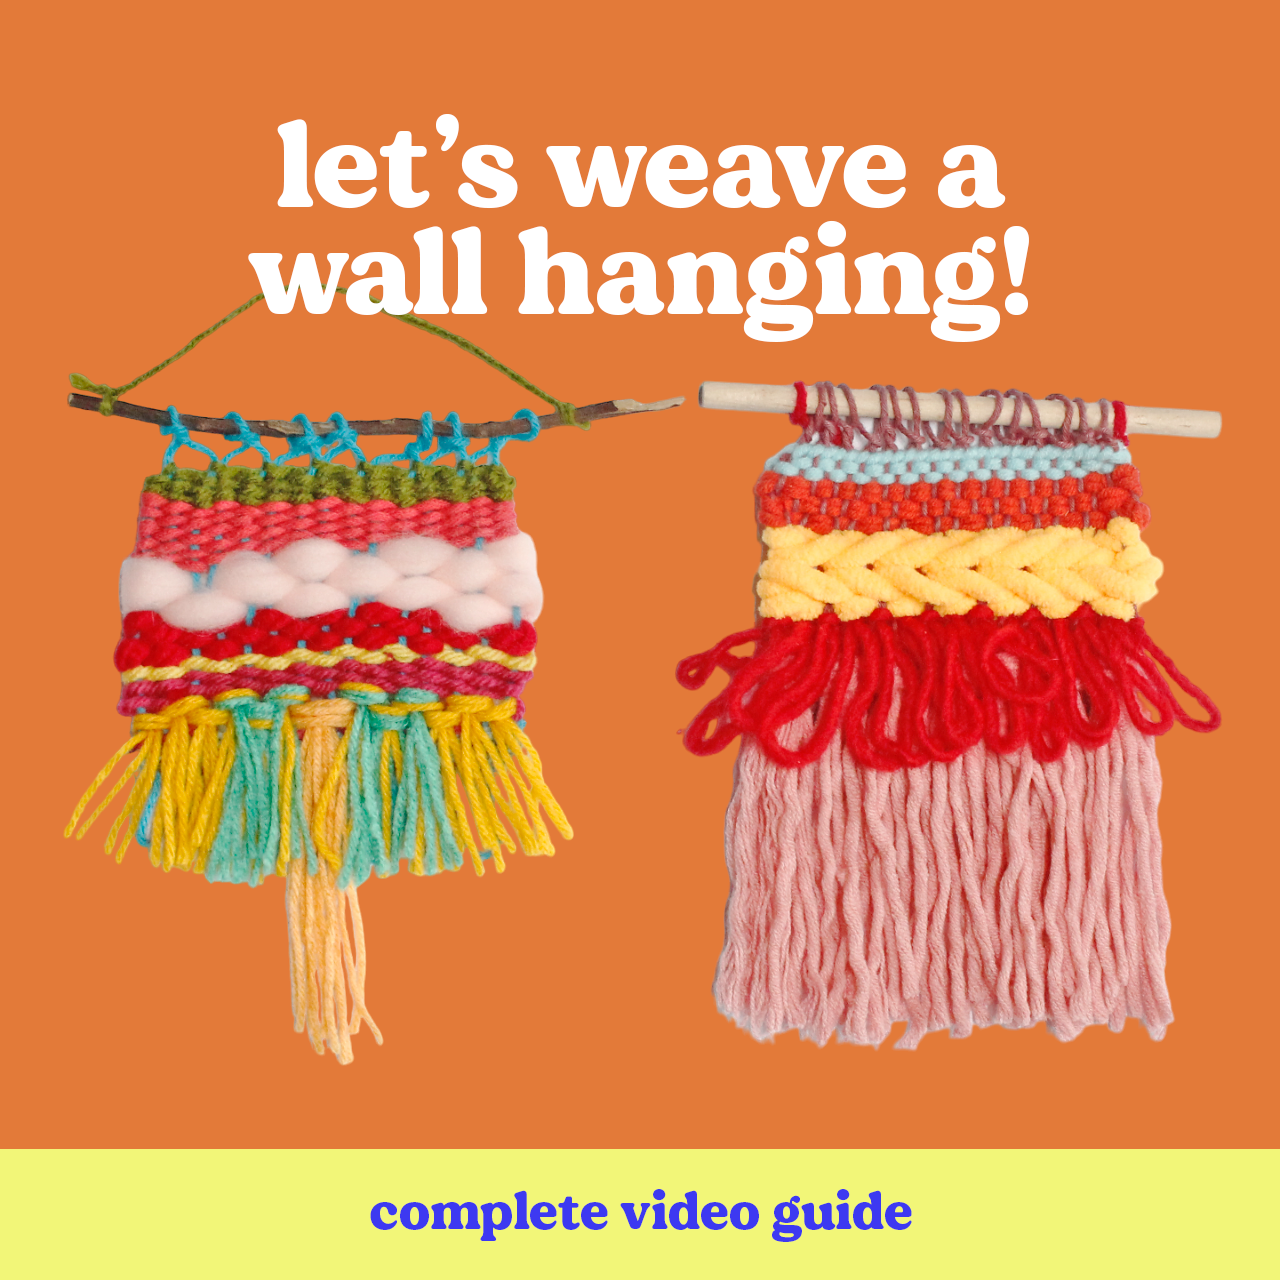 How to Weave: Woven Wall Hanging